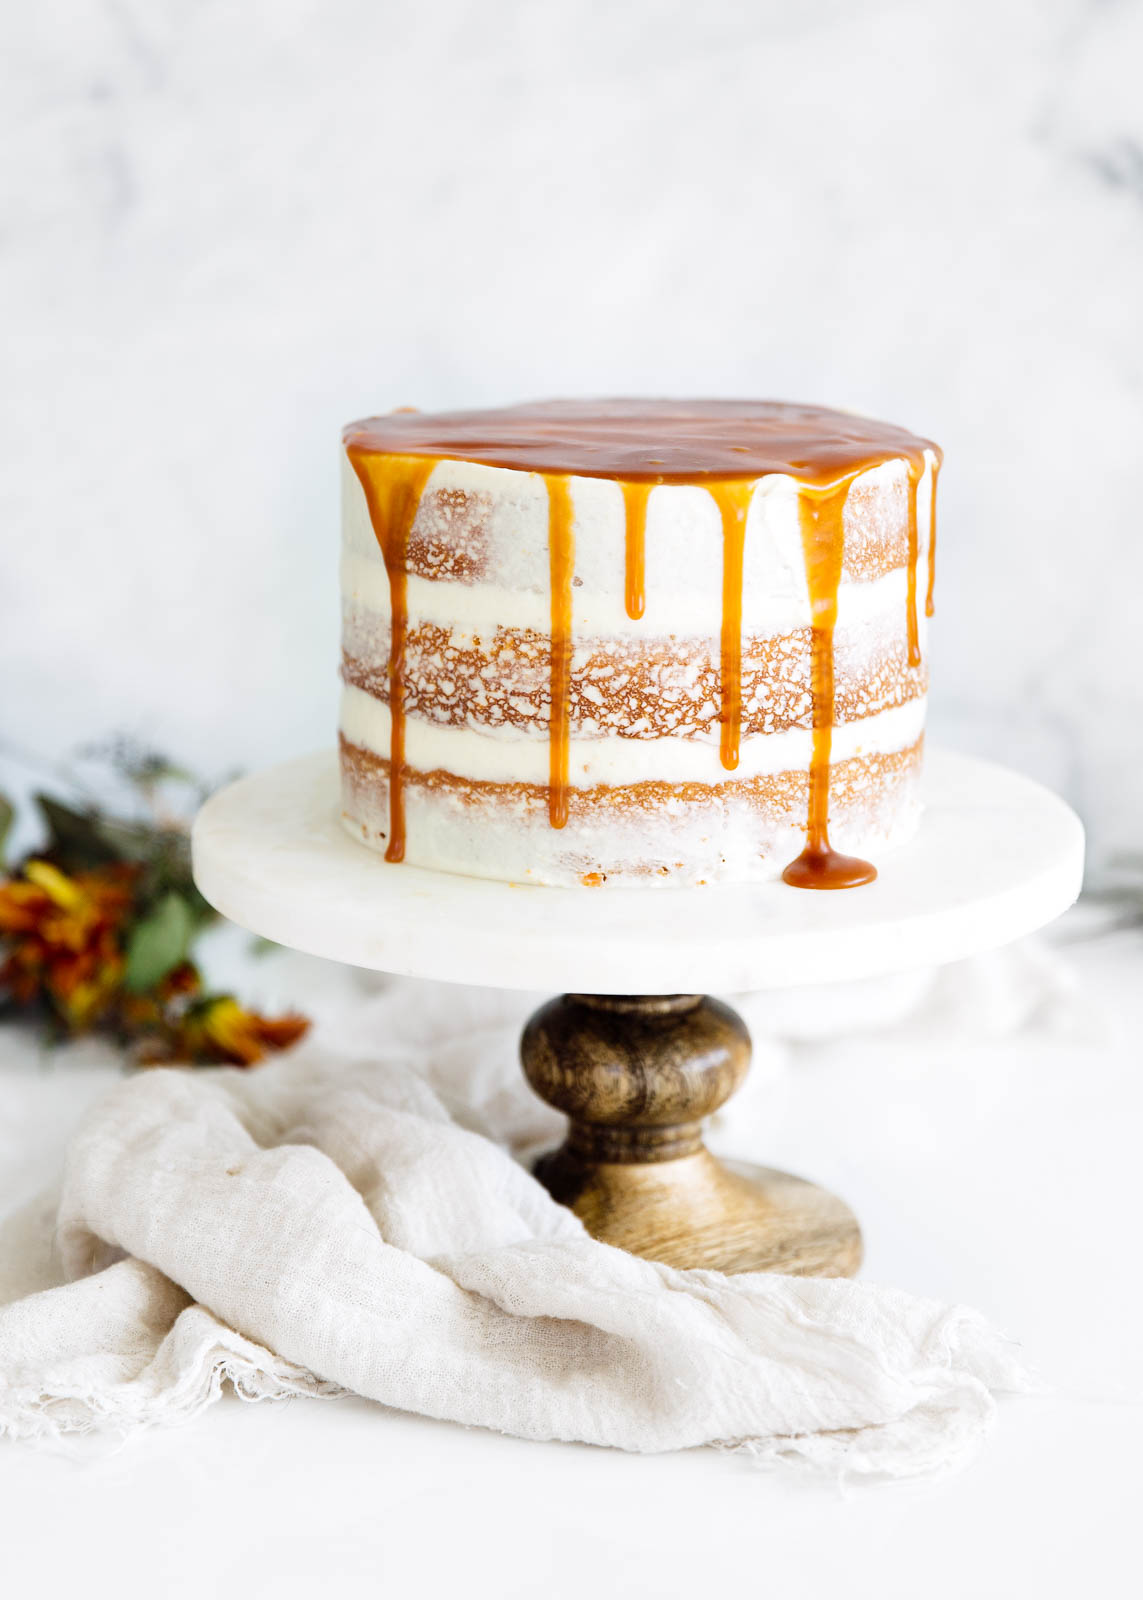 spiced carrot cake on a cake stand